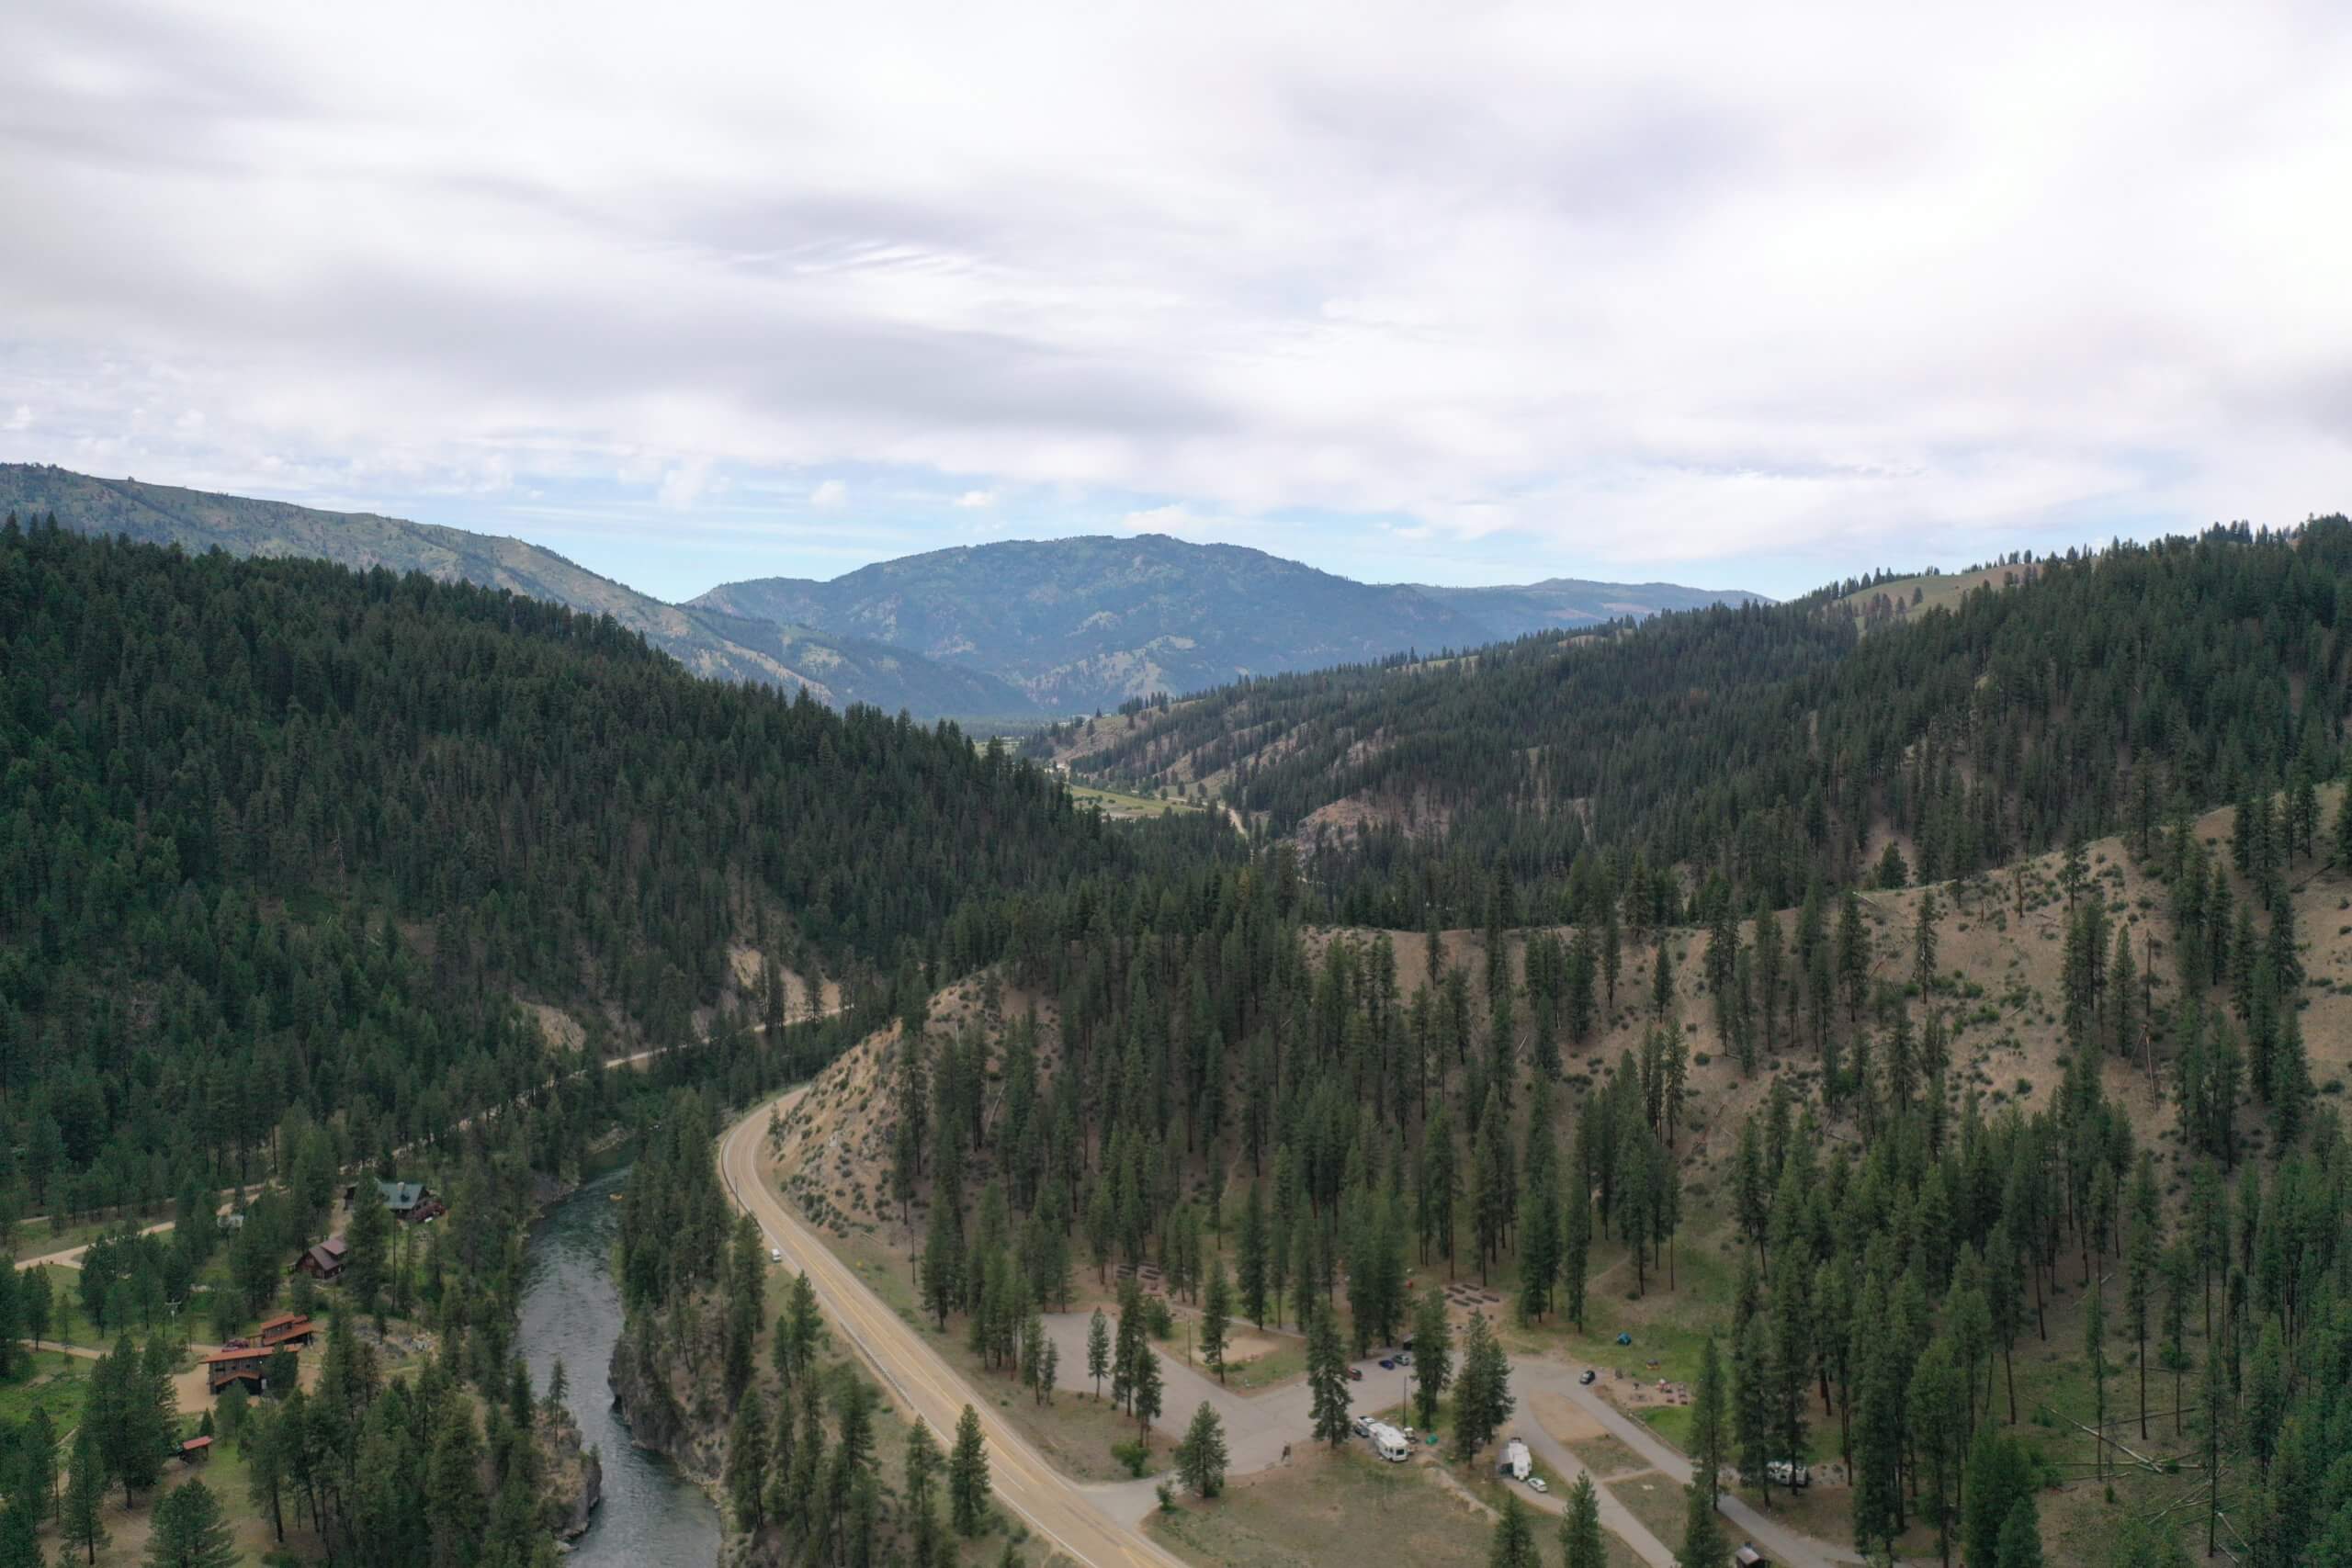 An aerial shot of the South fork of the Payette River